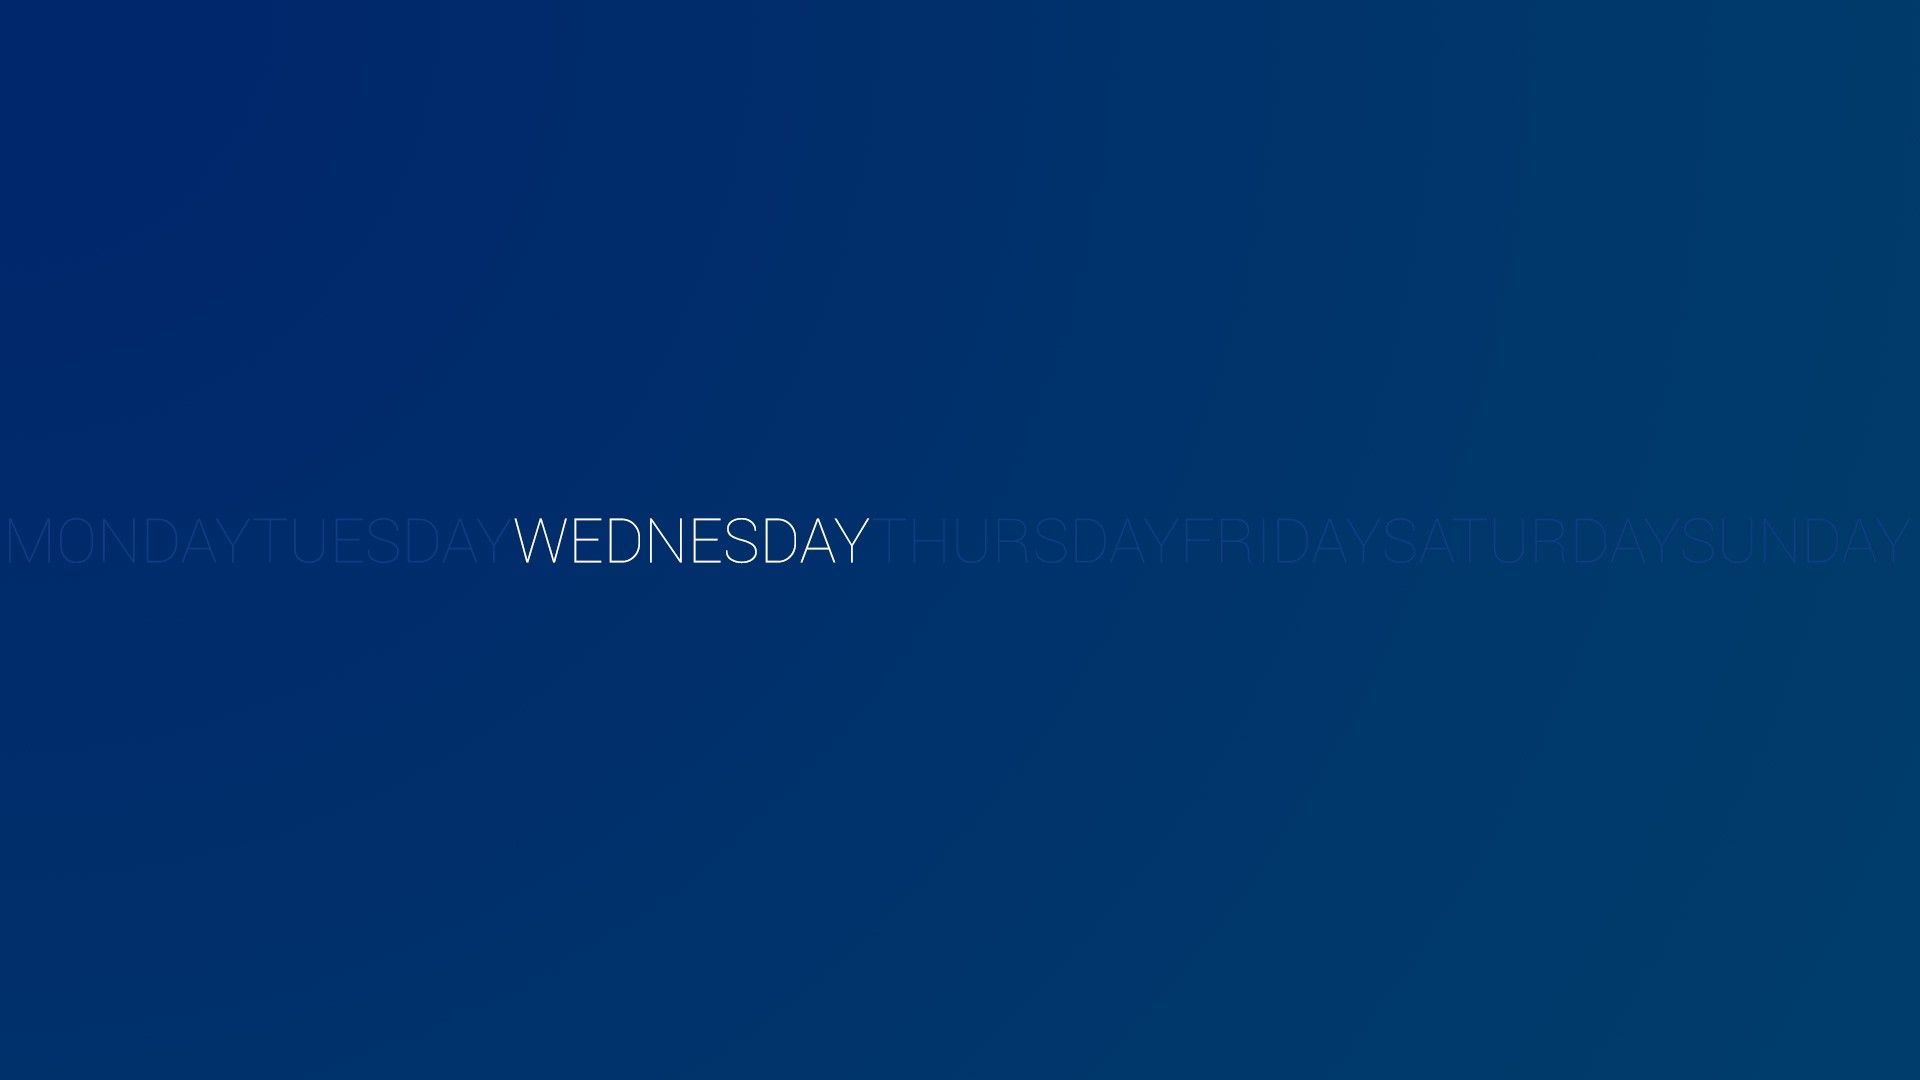 Wednesday Wallpaper For Computer